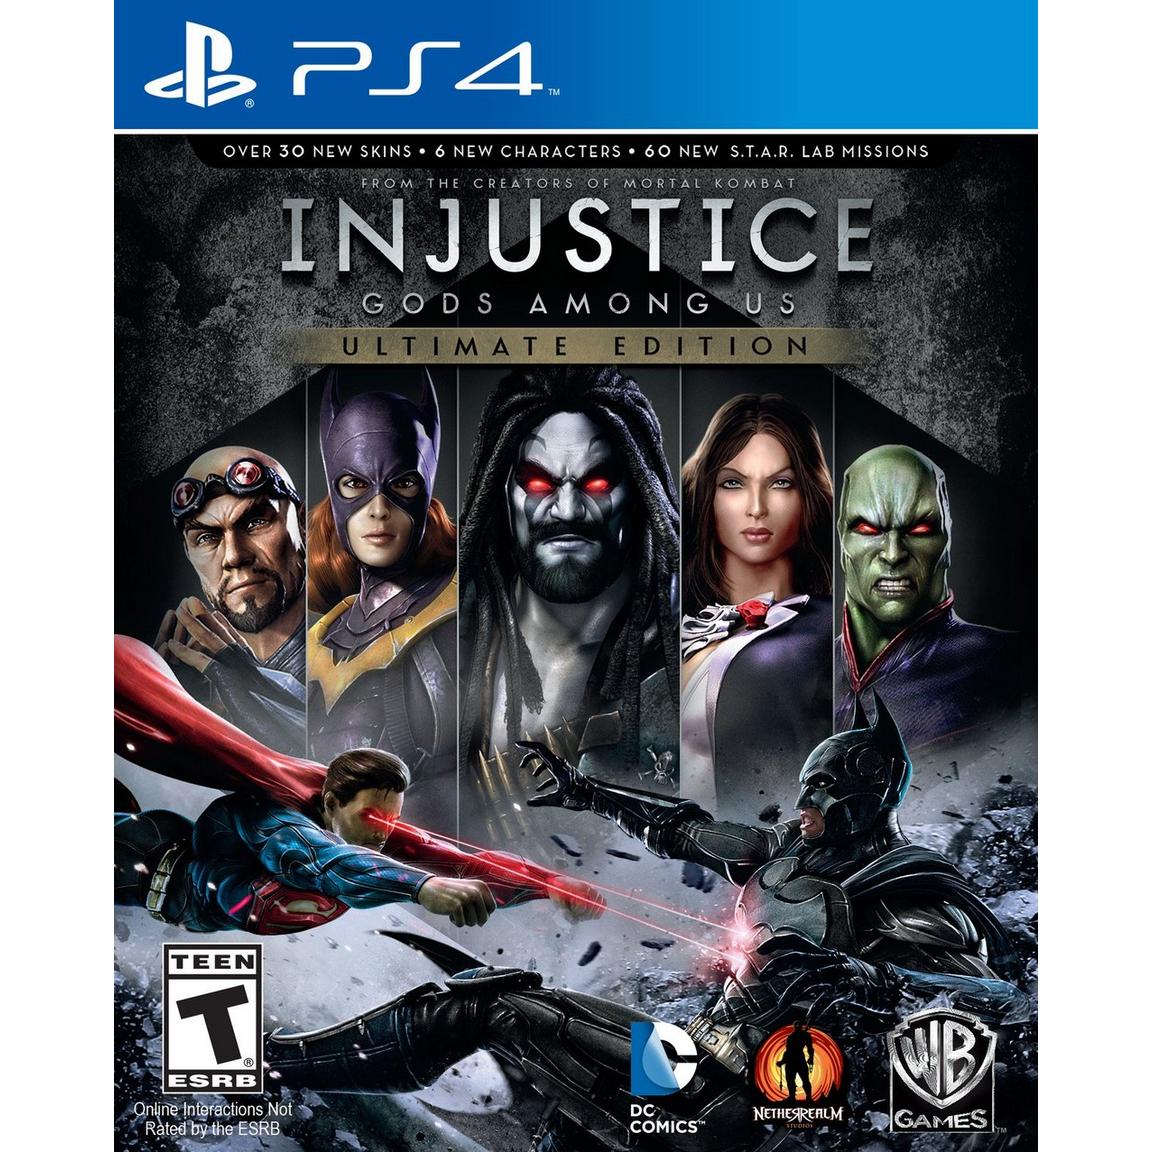 Injustice: Gods Among Us Ultimate Edition - PlayStation 4, Pre-Owned -  Warner Bros. Interactive Entertainment